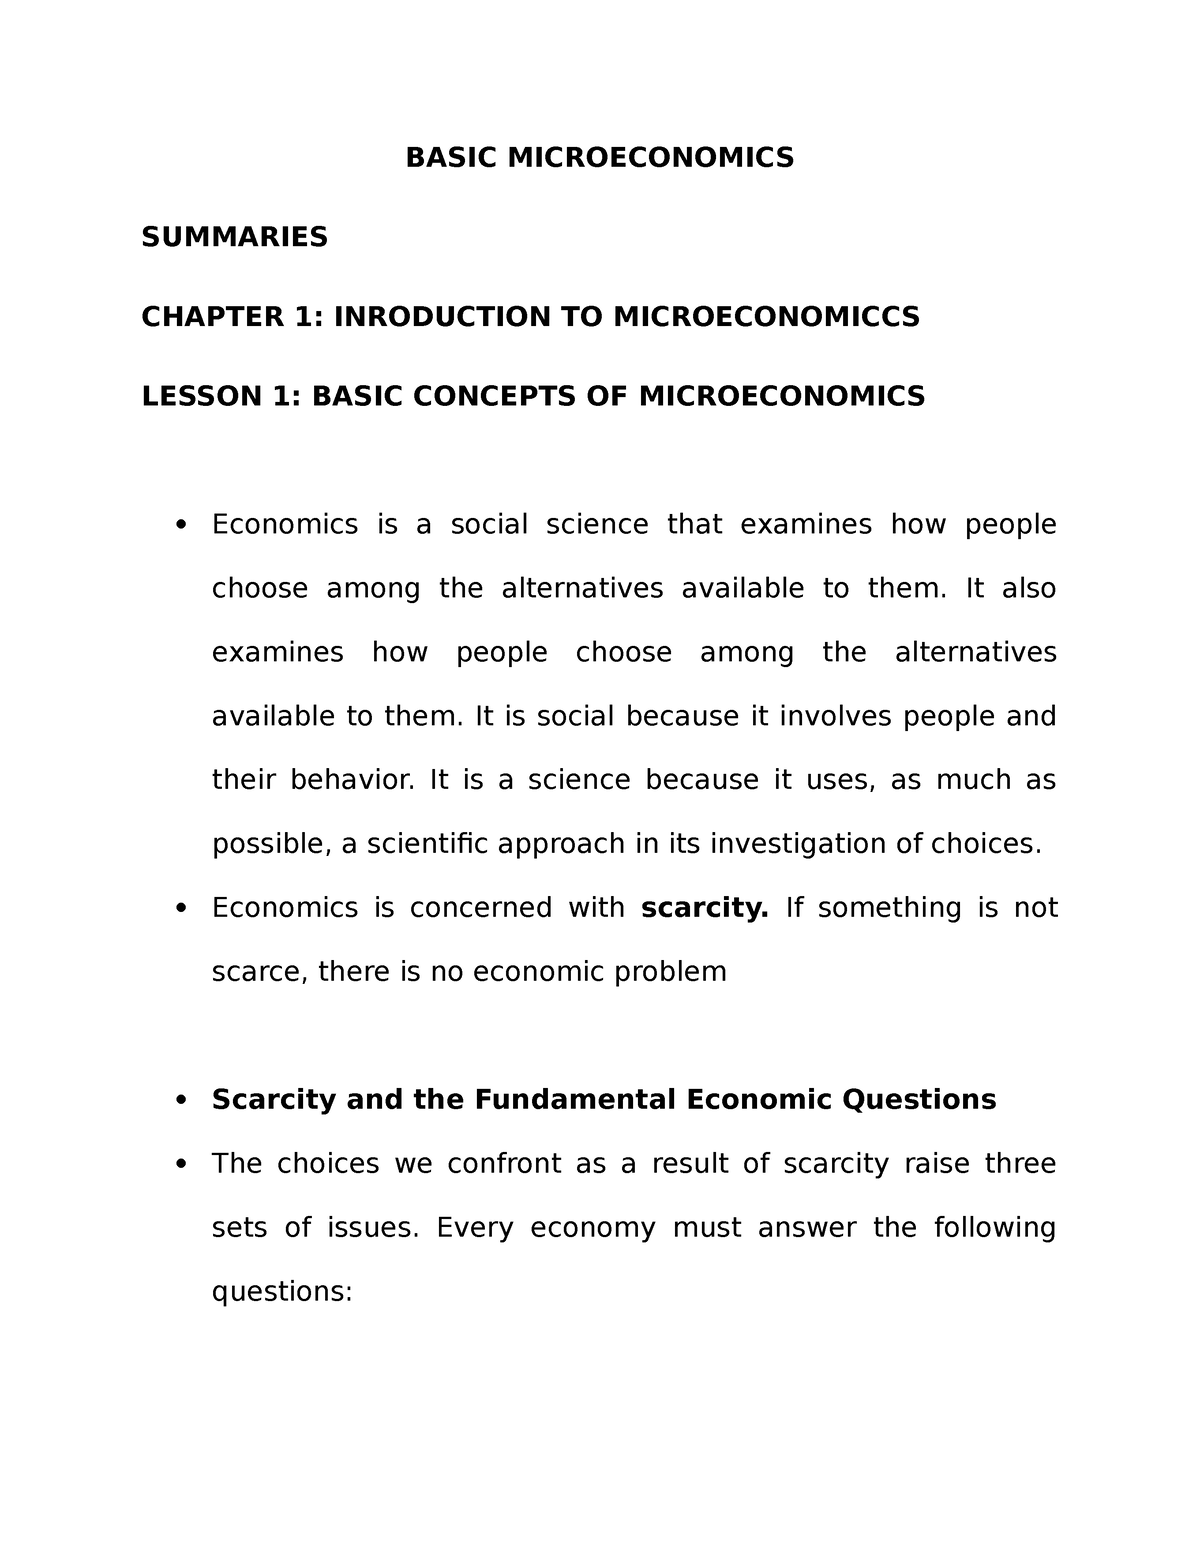 microeconomics assignment 1 answers